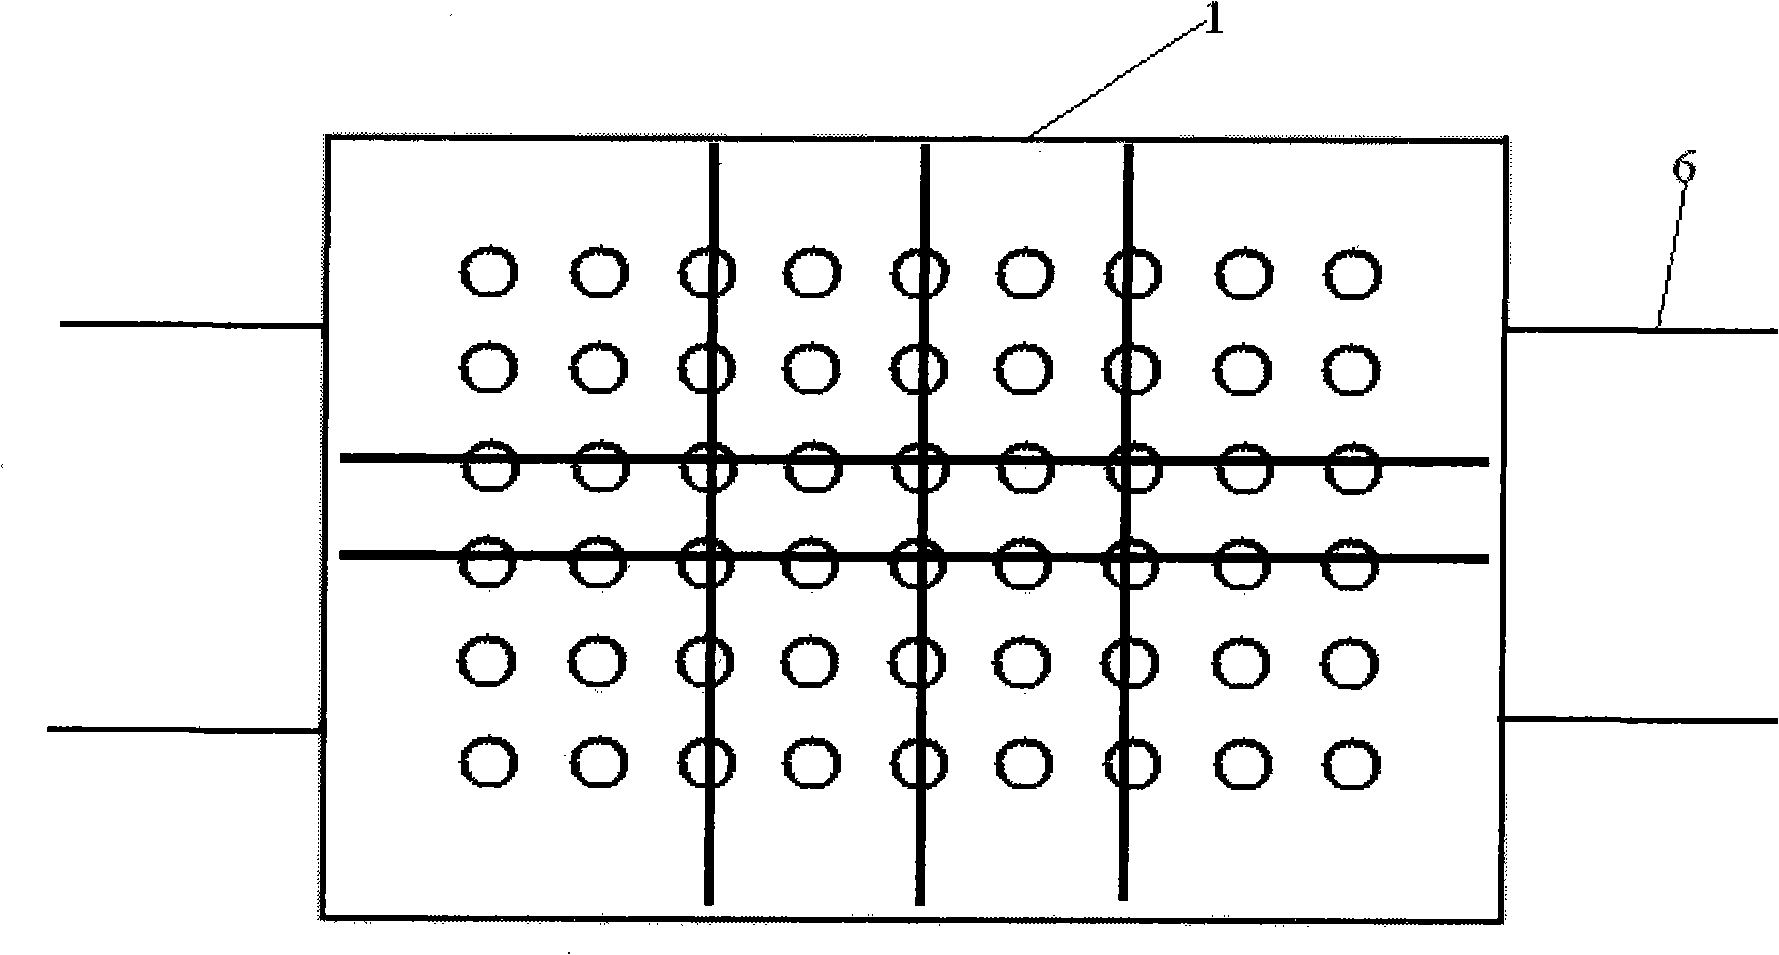 Electrode array for detecting channels and collaterals signals on human body surface